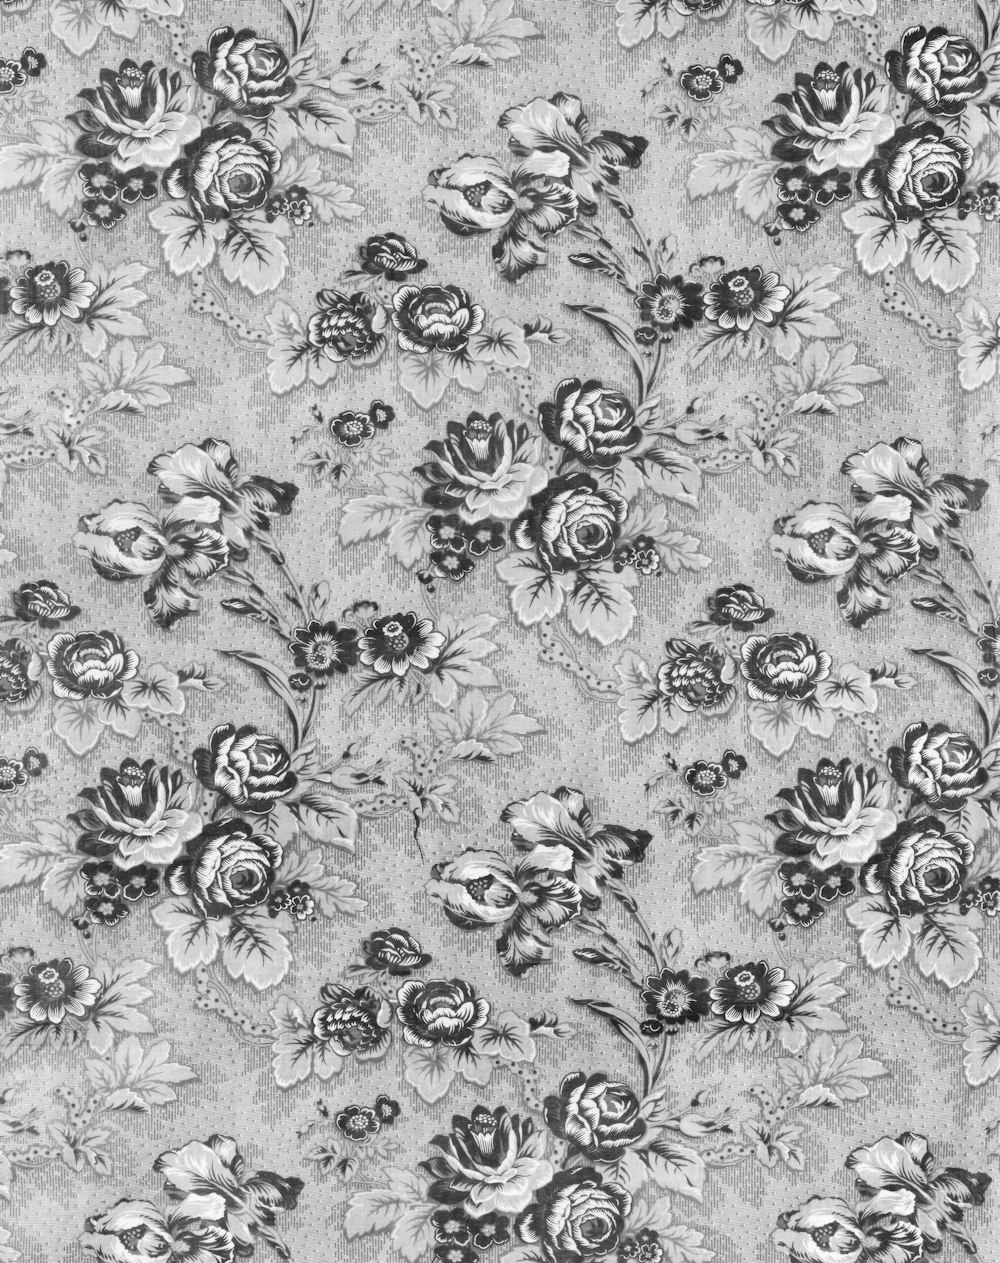 a black and white floral pattern on a gray background